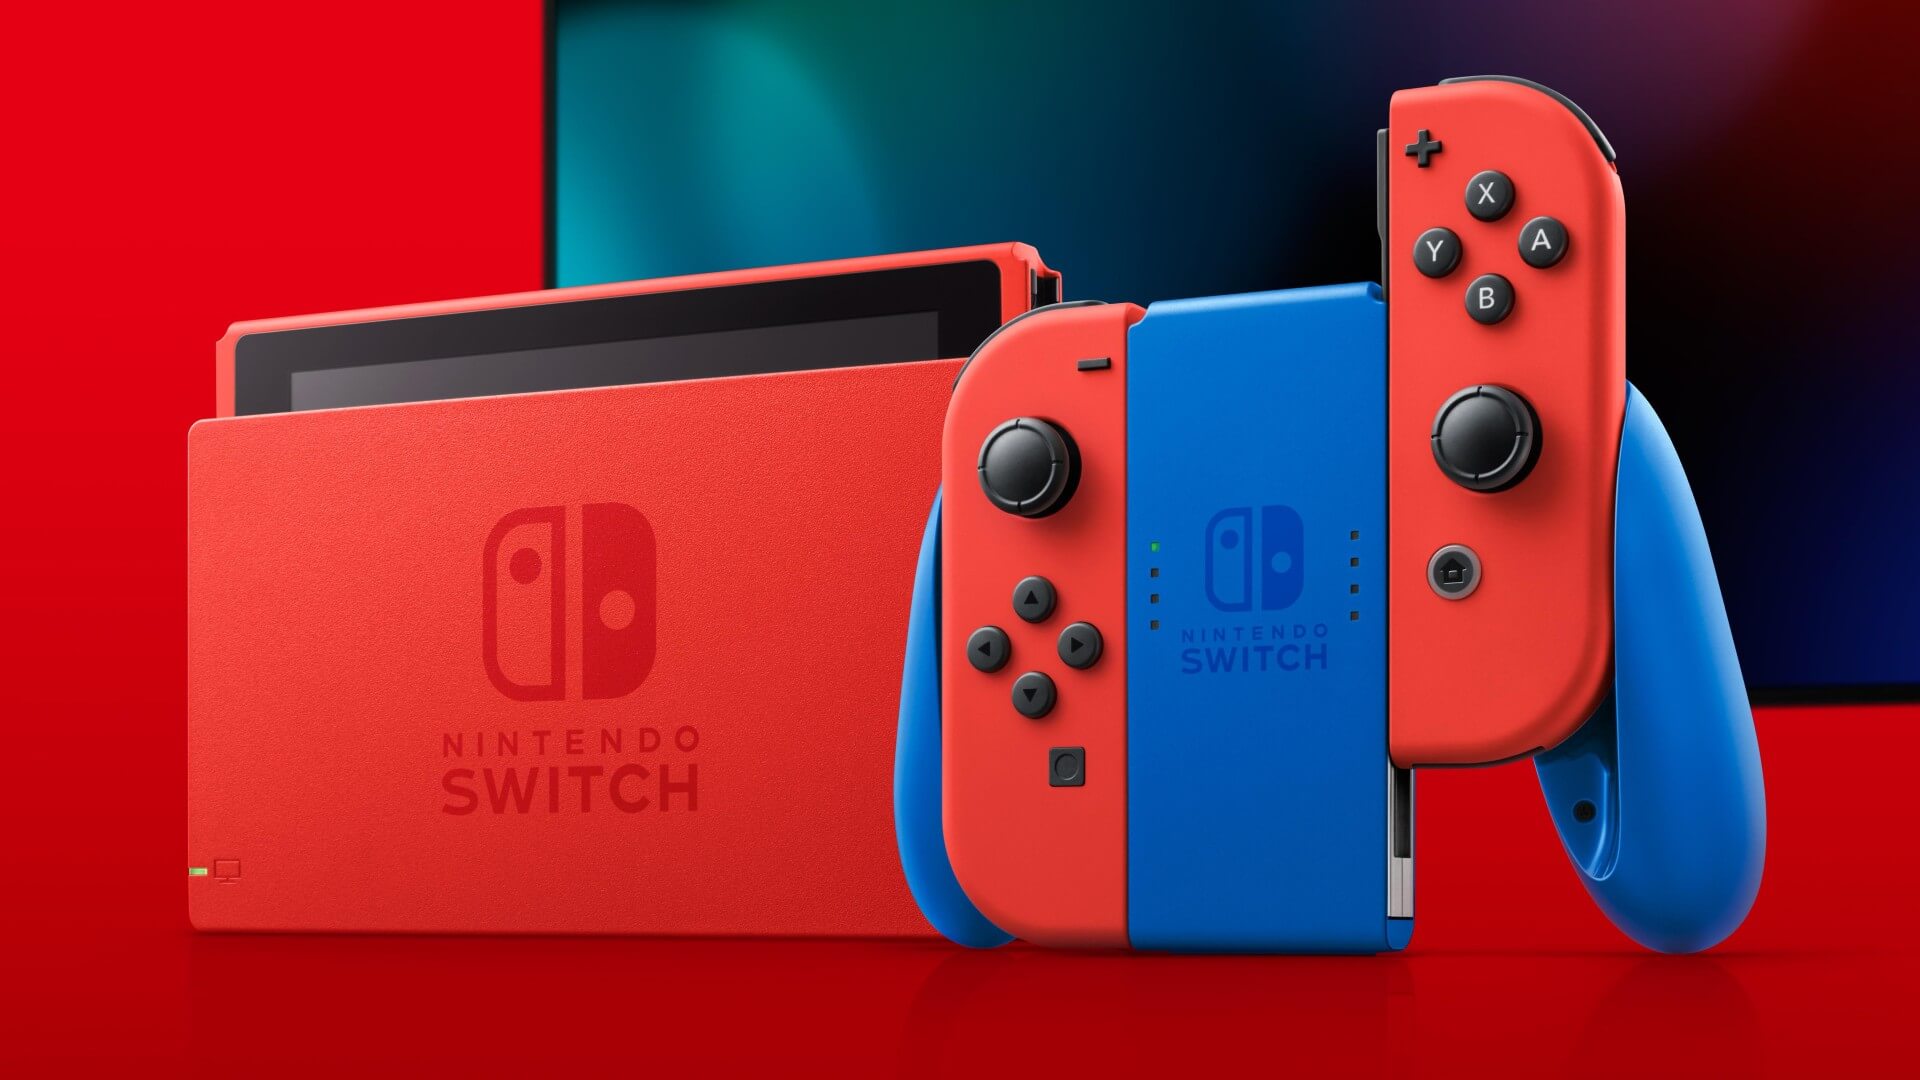 bånd tackle Anslået Nintendo Switch New Model with Bigger Display in 2021 | The Nerd Stash